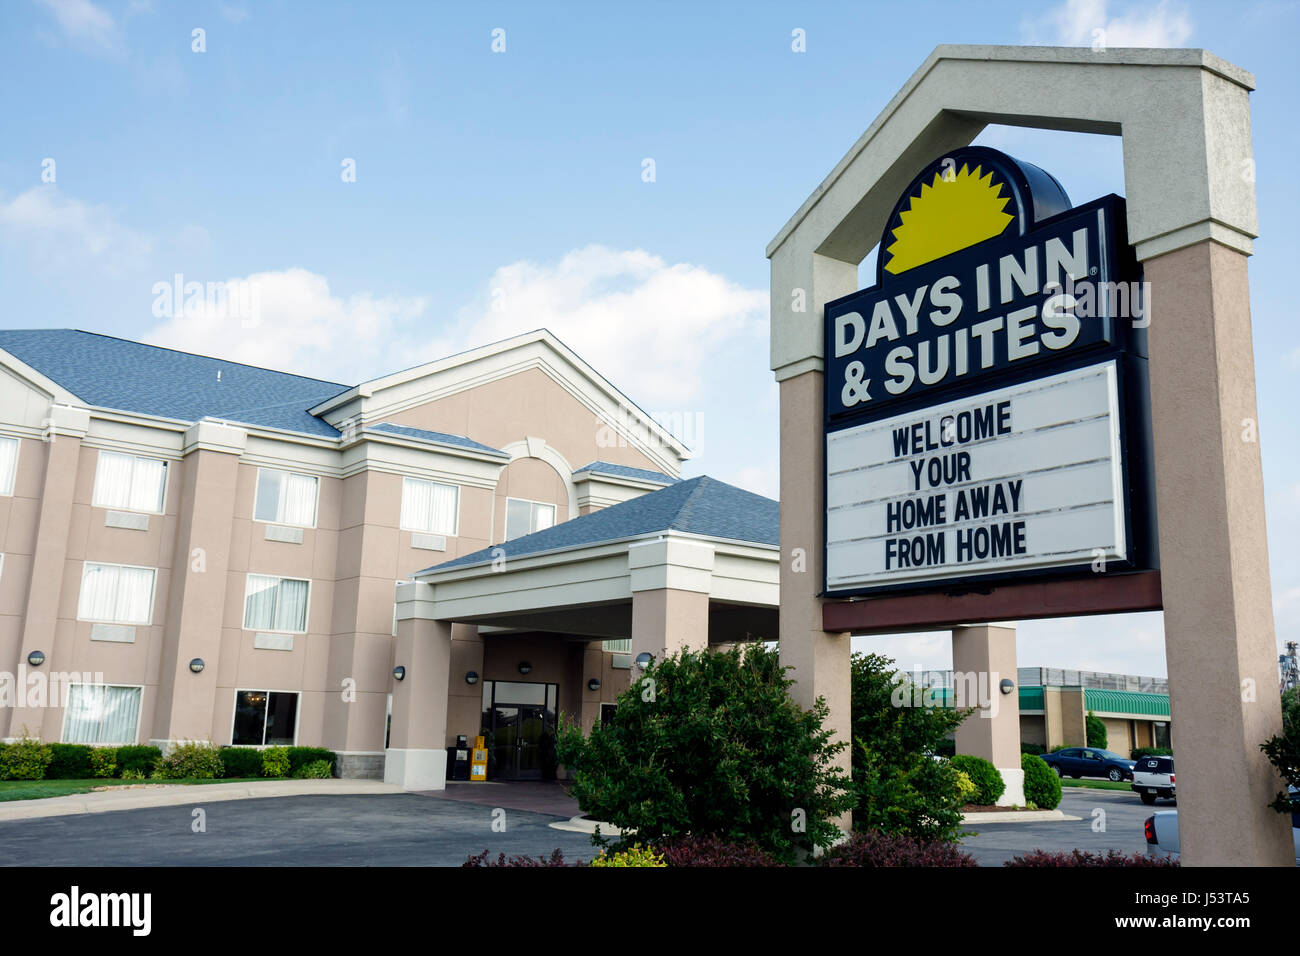 Arkansas Randolph County,Pocahontas,Days Inn,& Suites,motel,hotel,outside exterior,front,entrance,entrance,front,building,lodging,hospitality industry Stock Photo